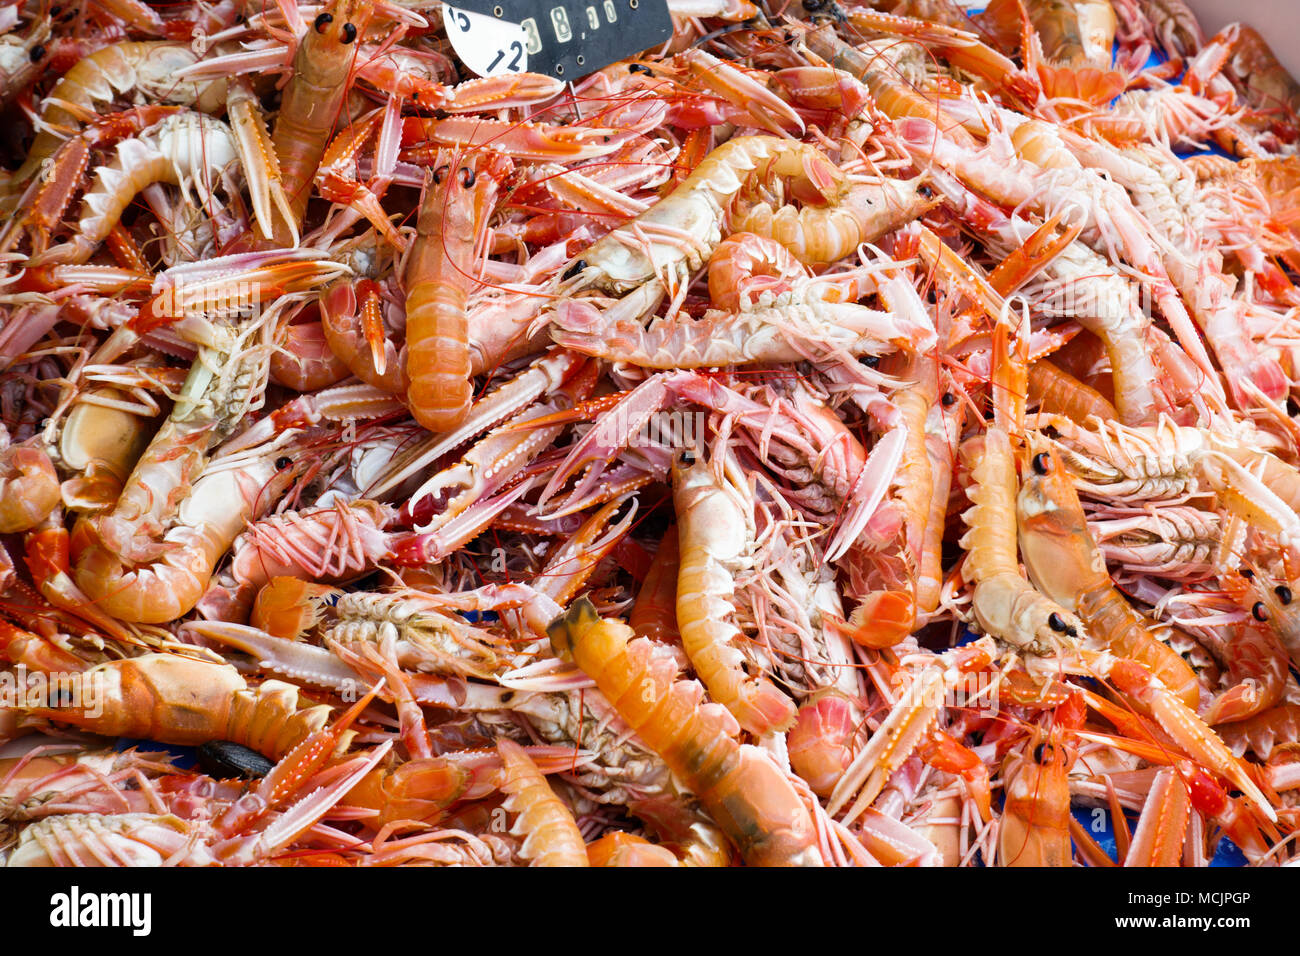 Fresh Cancer Irroratus crabs for sale at fish market Stock Photo